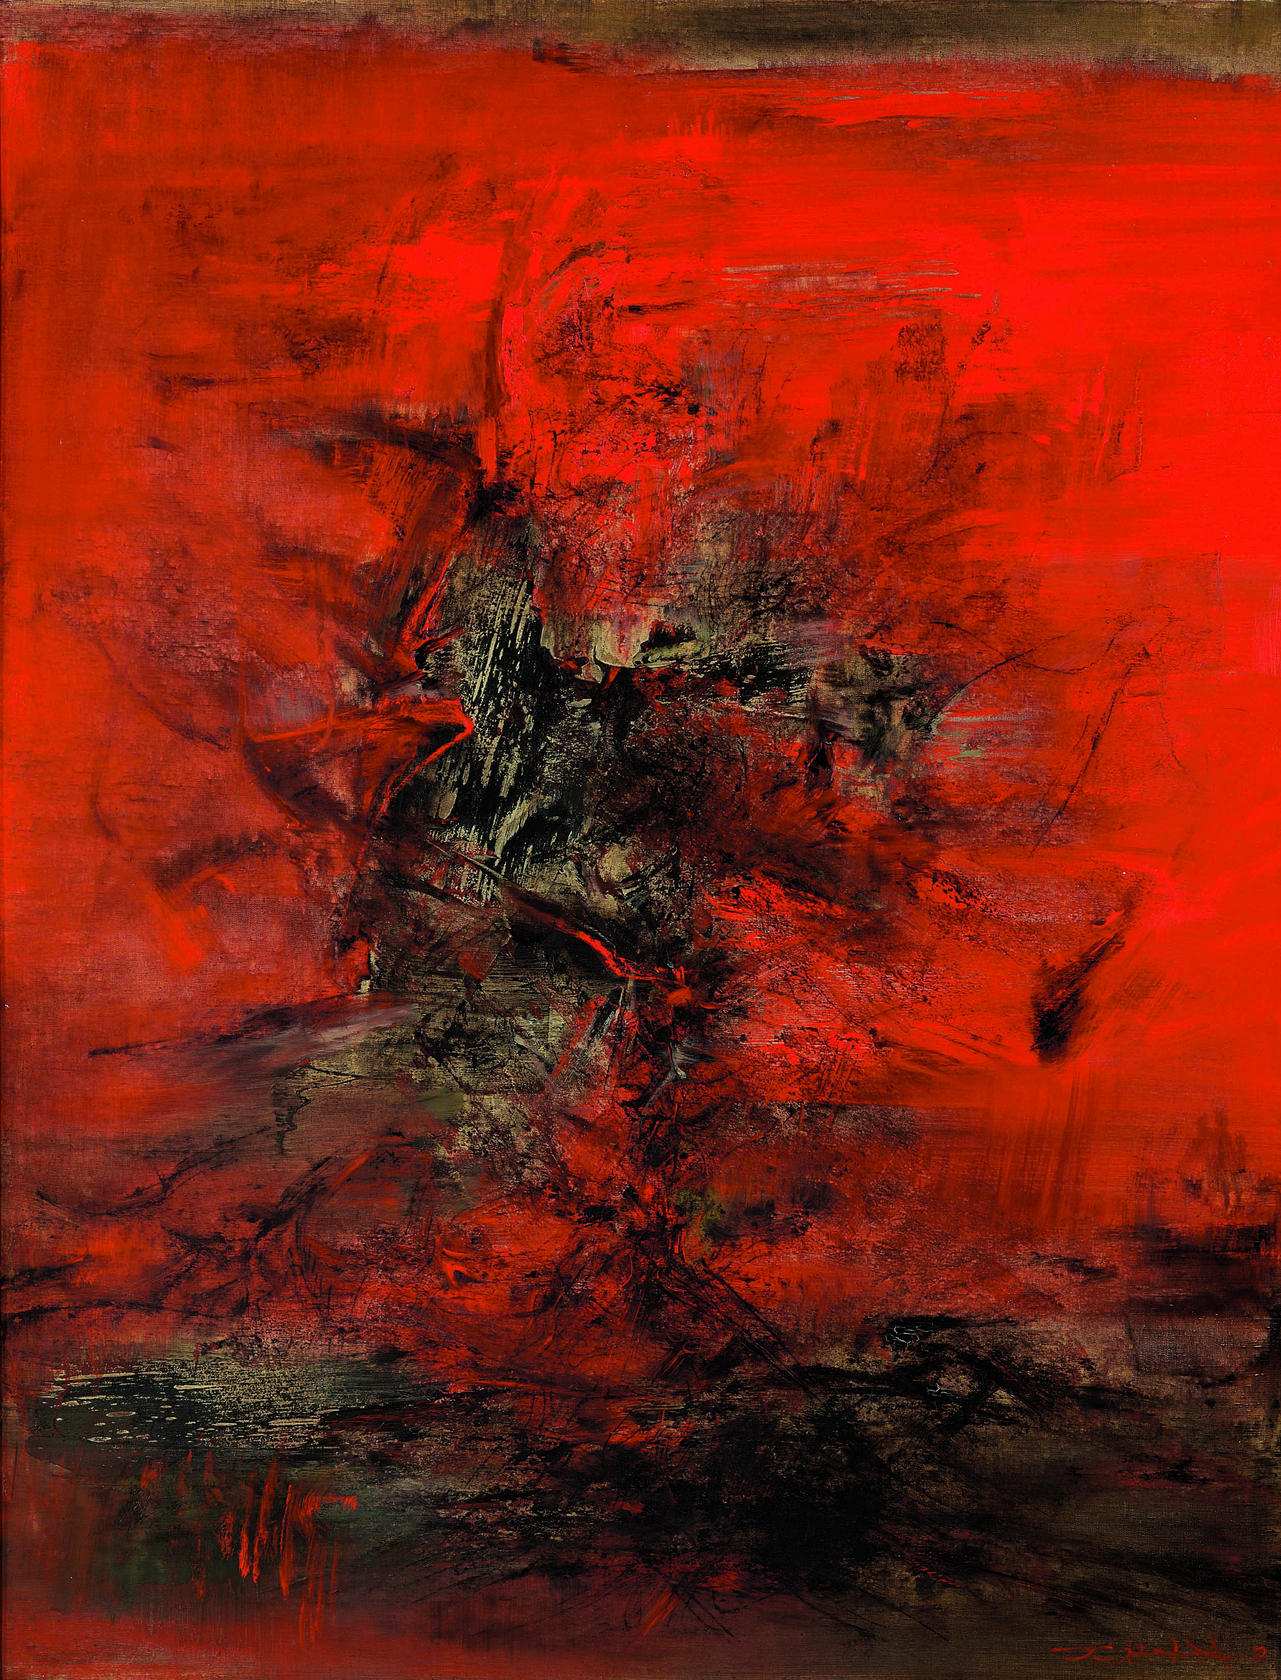 ZAO WOU-KI (Zhao Wuji, French/Chinese, B. 1920) oil on canvas 115 x 88.5 cm. Painted in 1963. Estimate, HK$10,000,000 to HK$15,000,000. Photo: Christie's Images Limited